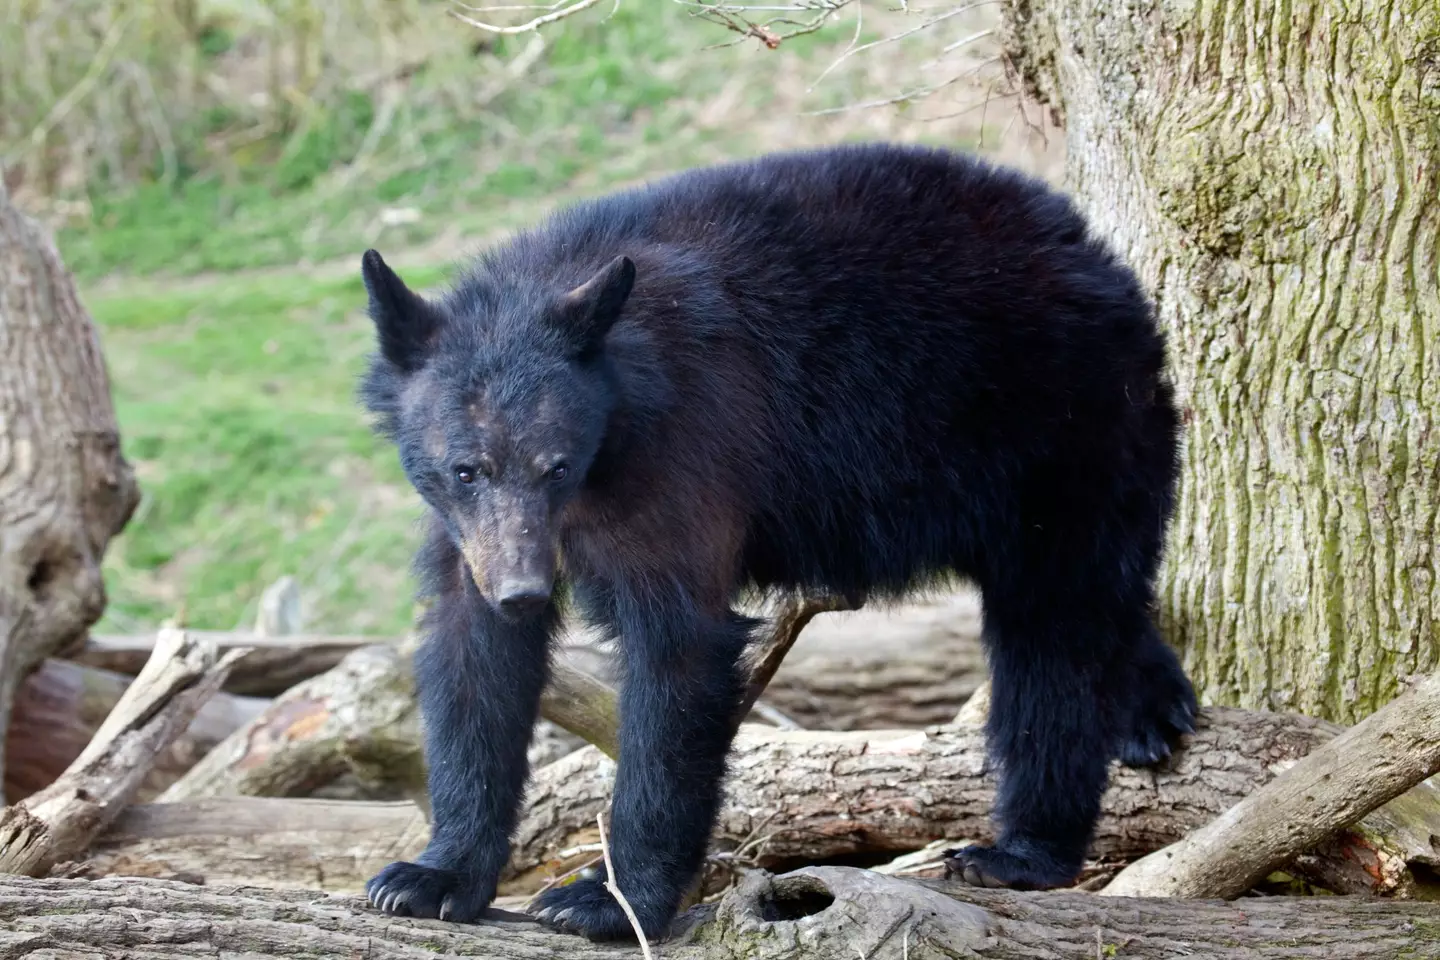 Samantha raced to the rescue after a black bear cub made its way into her garden.